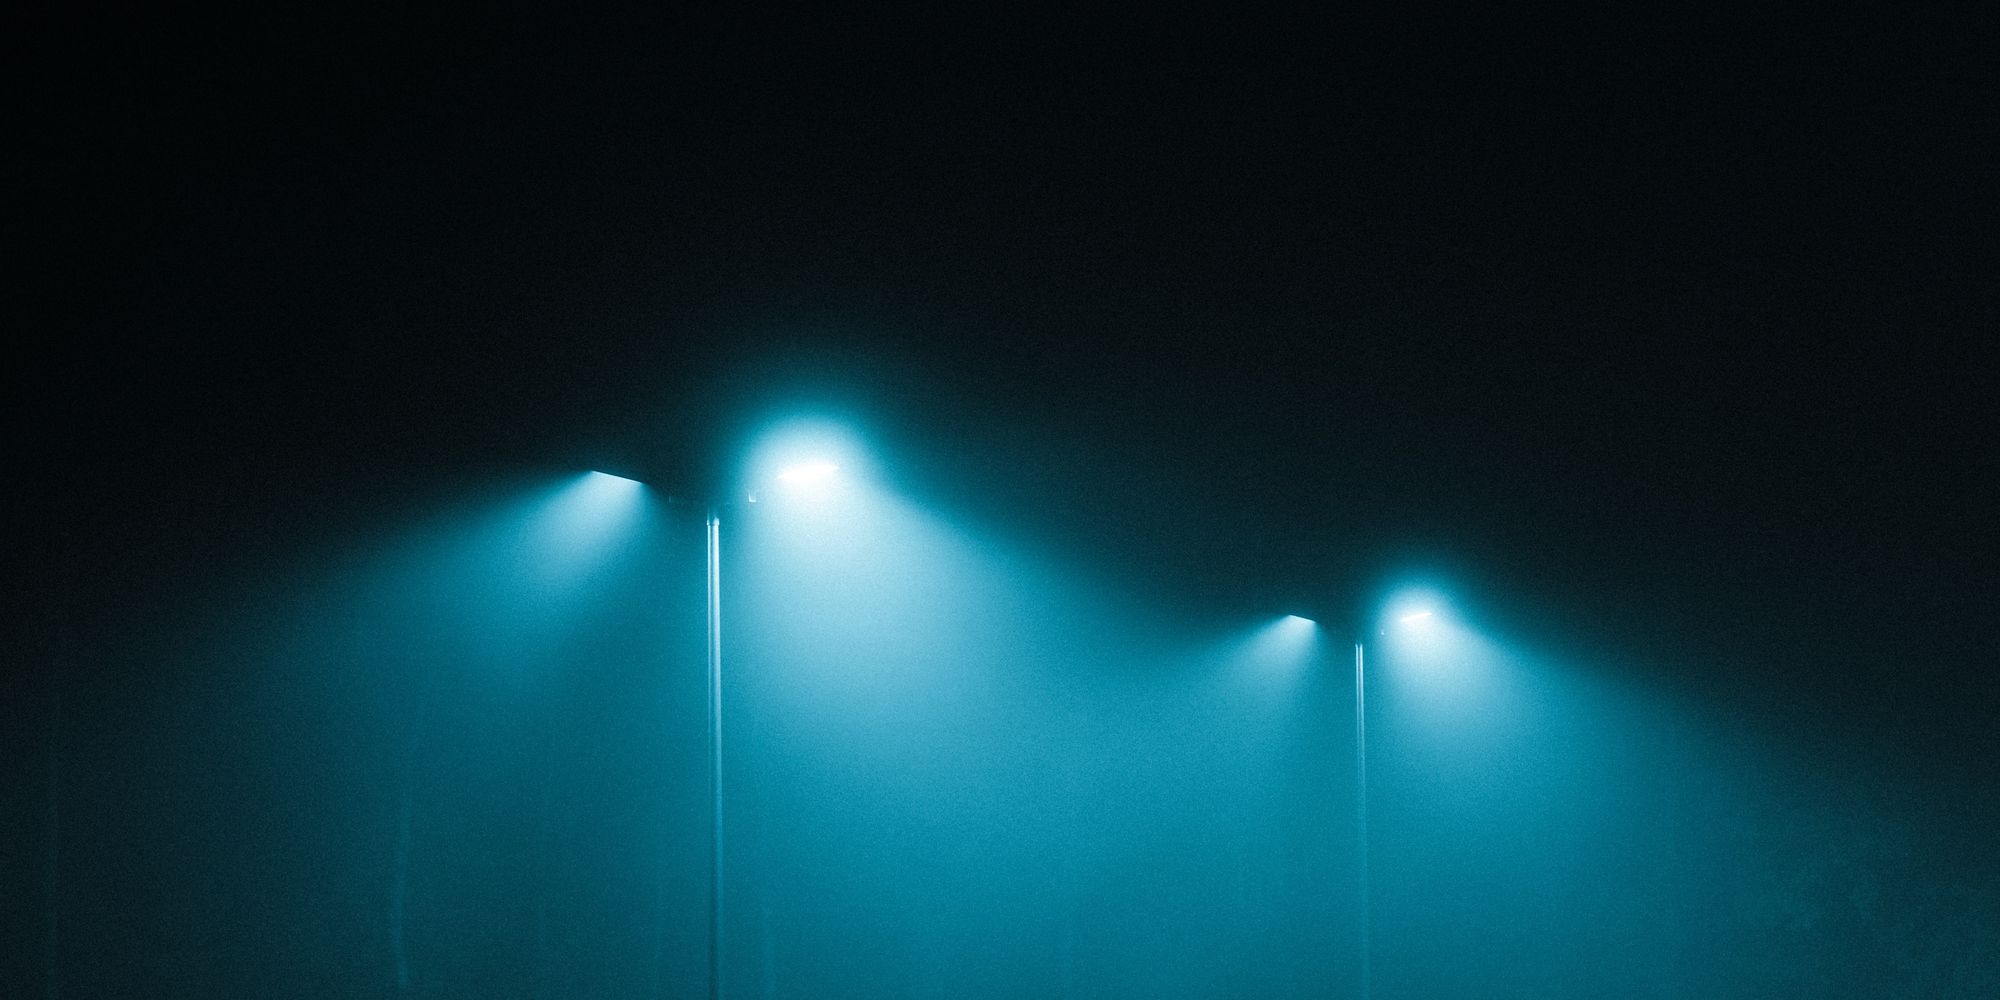 Cover Image for LED Street Lighting Is Brighter, Bluer, and Increasing Environmental Risk